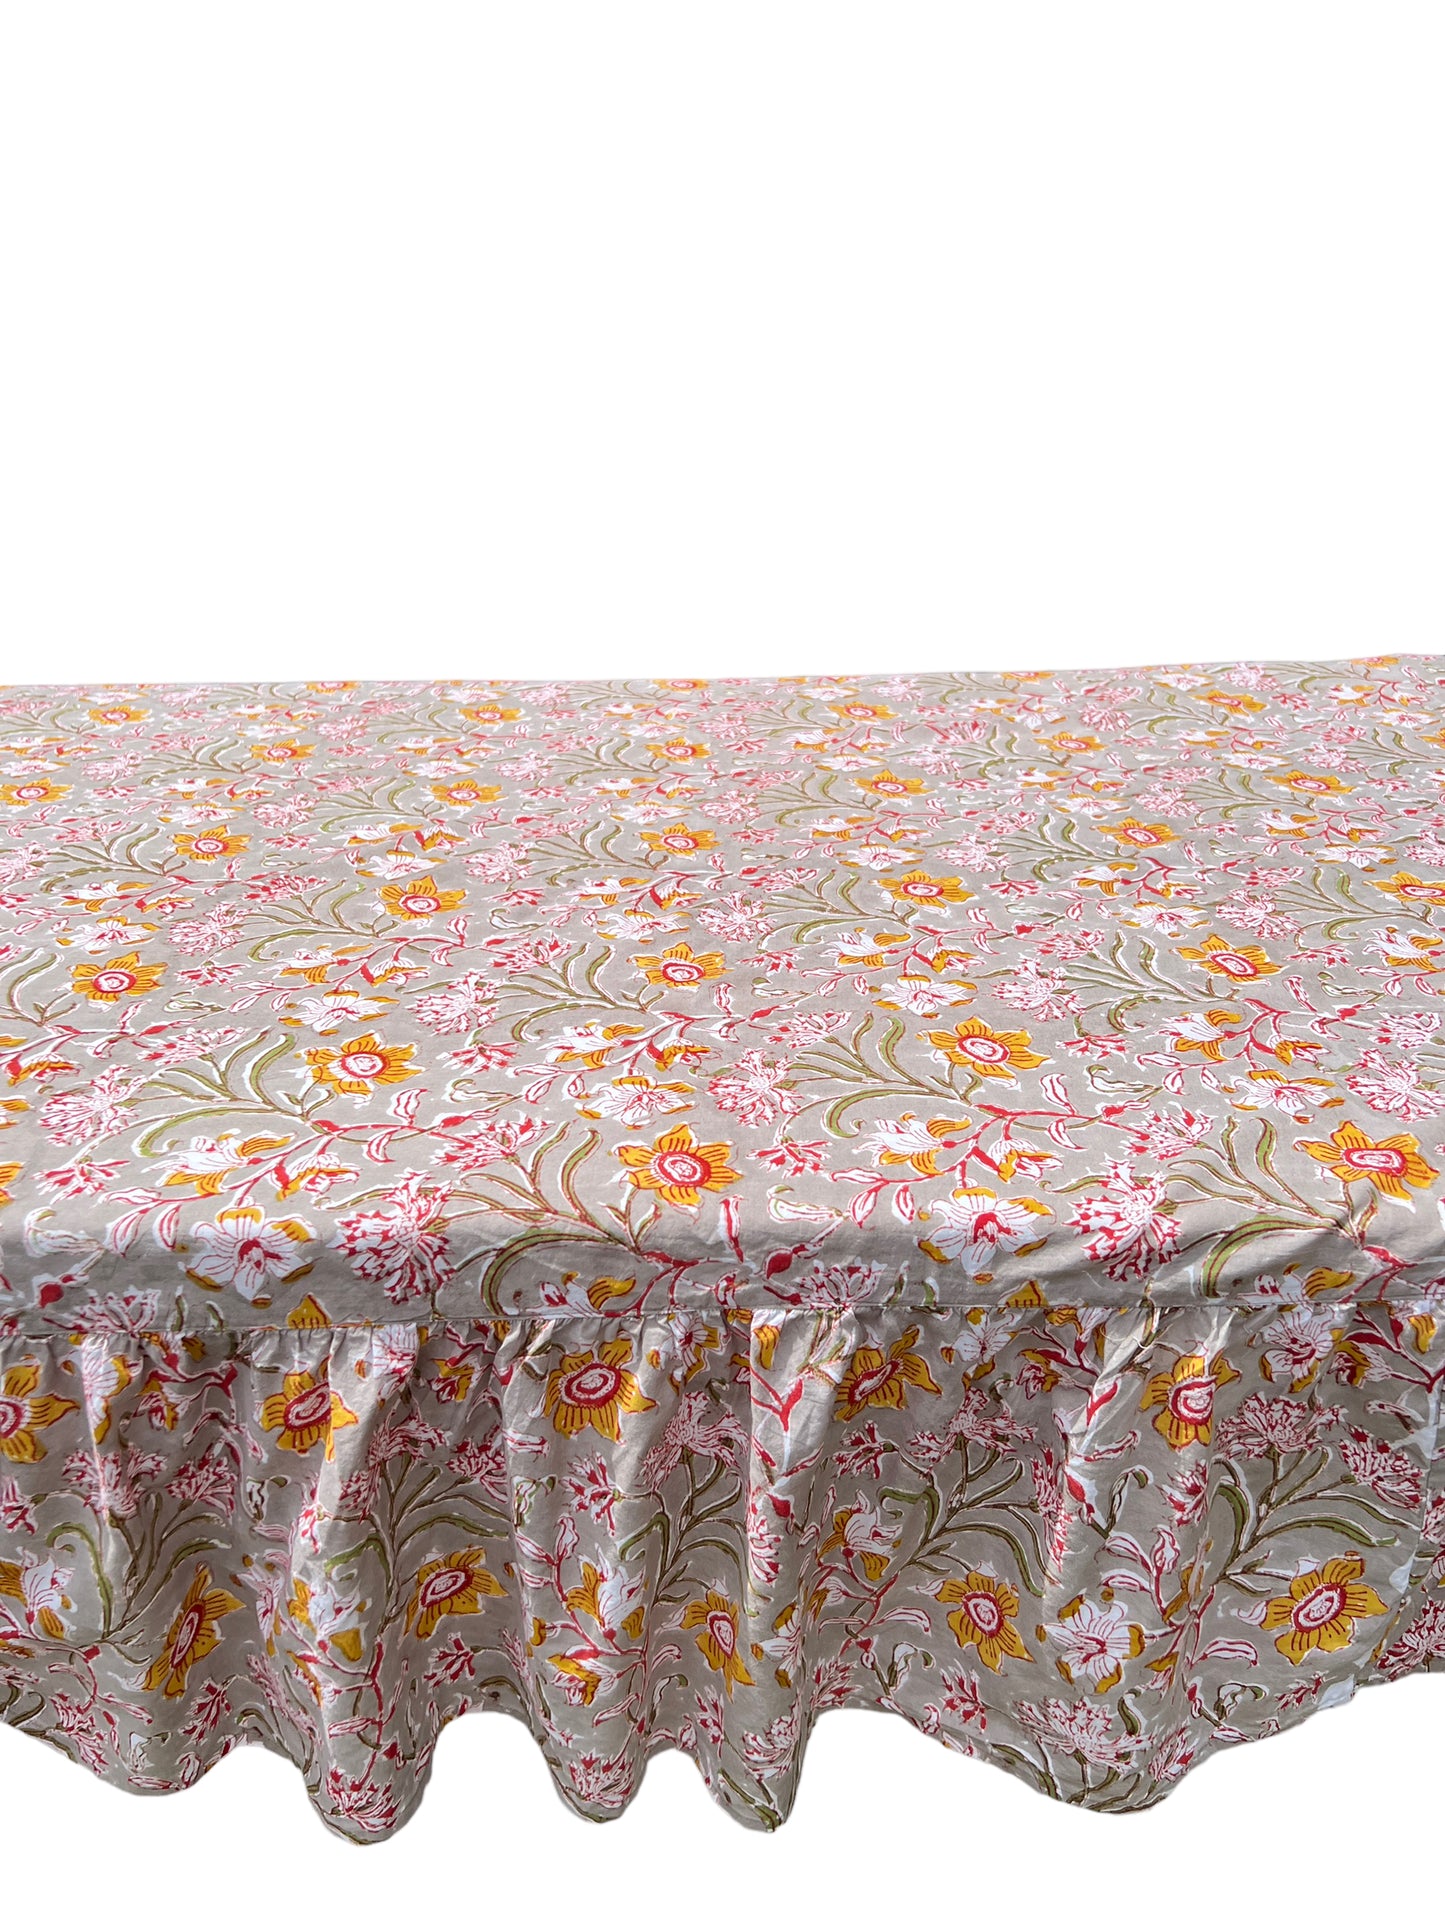 Gray Floral Ruffle Table Linens